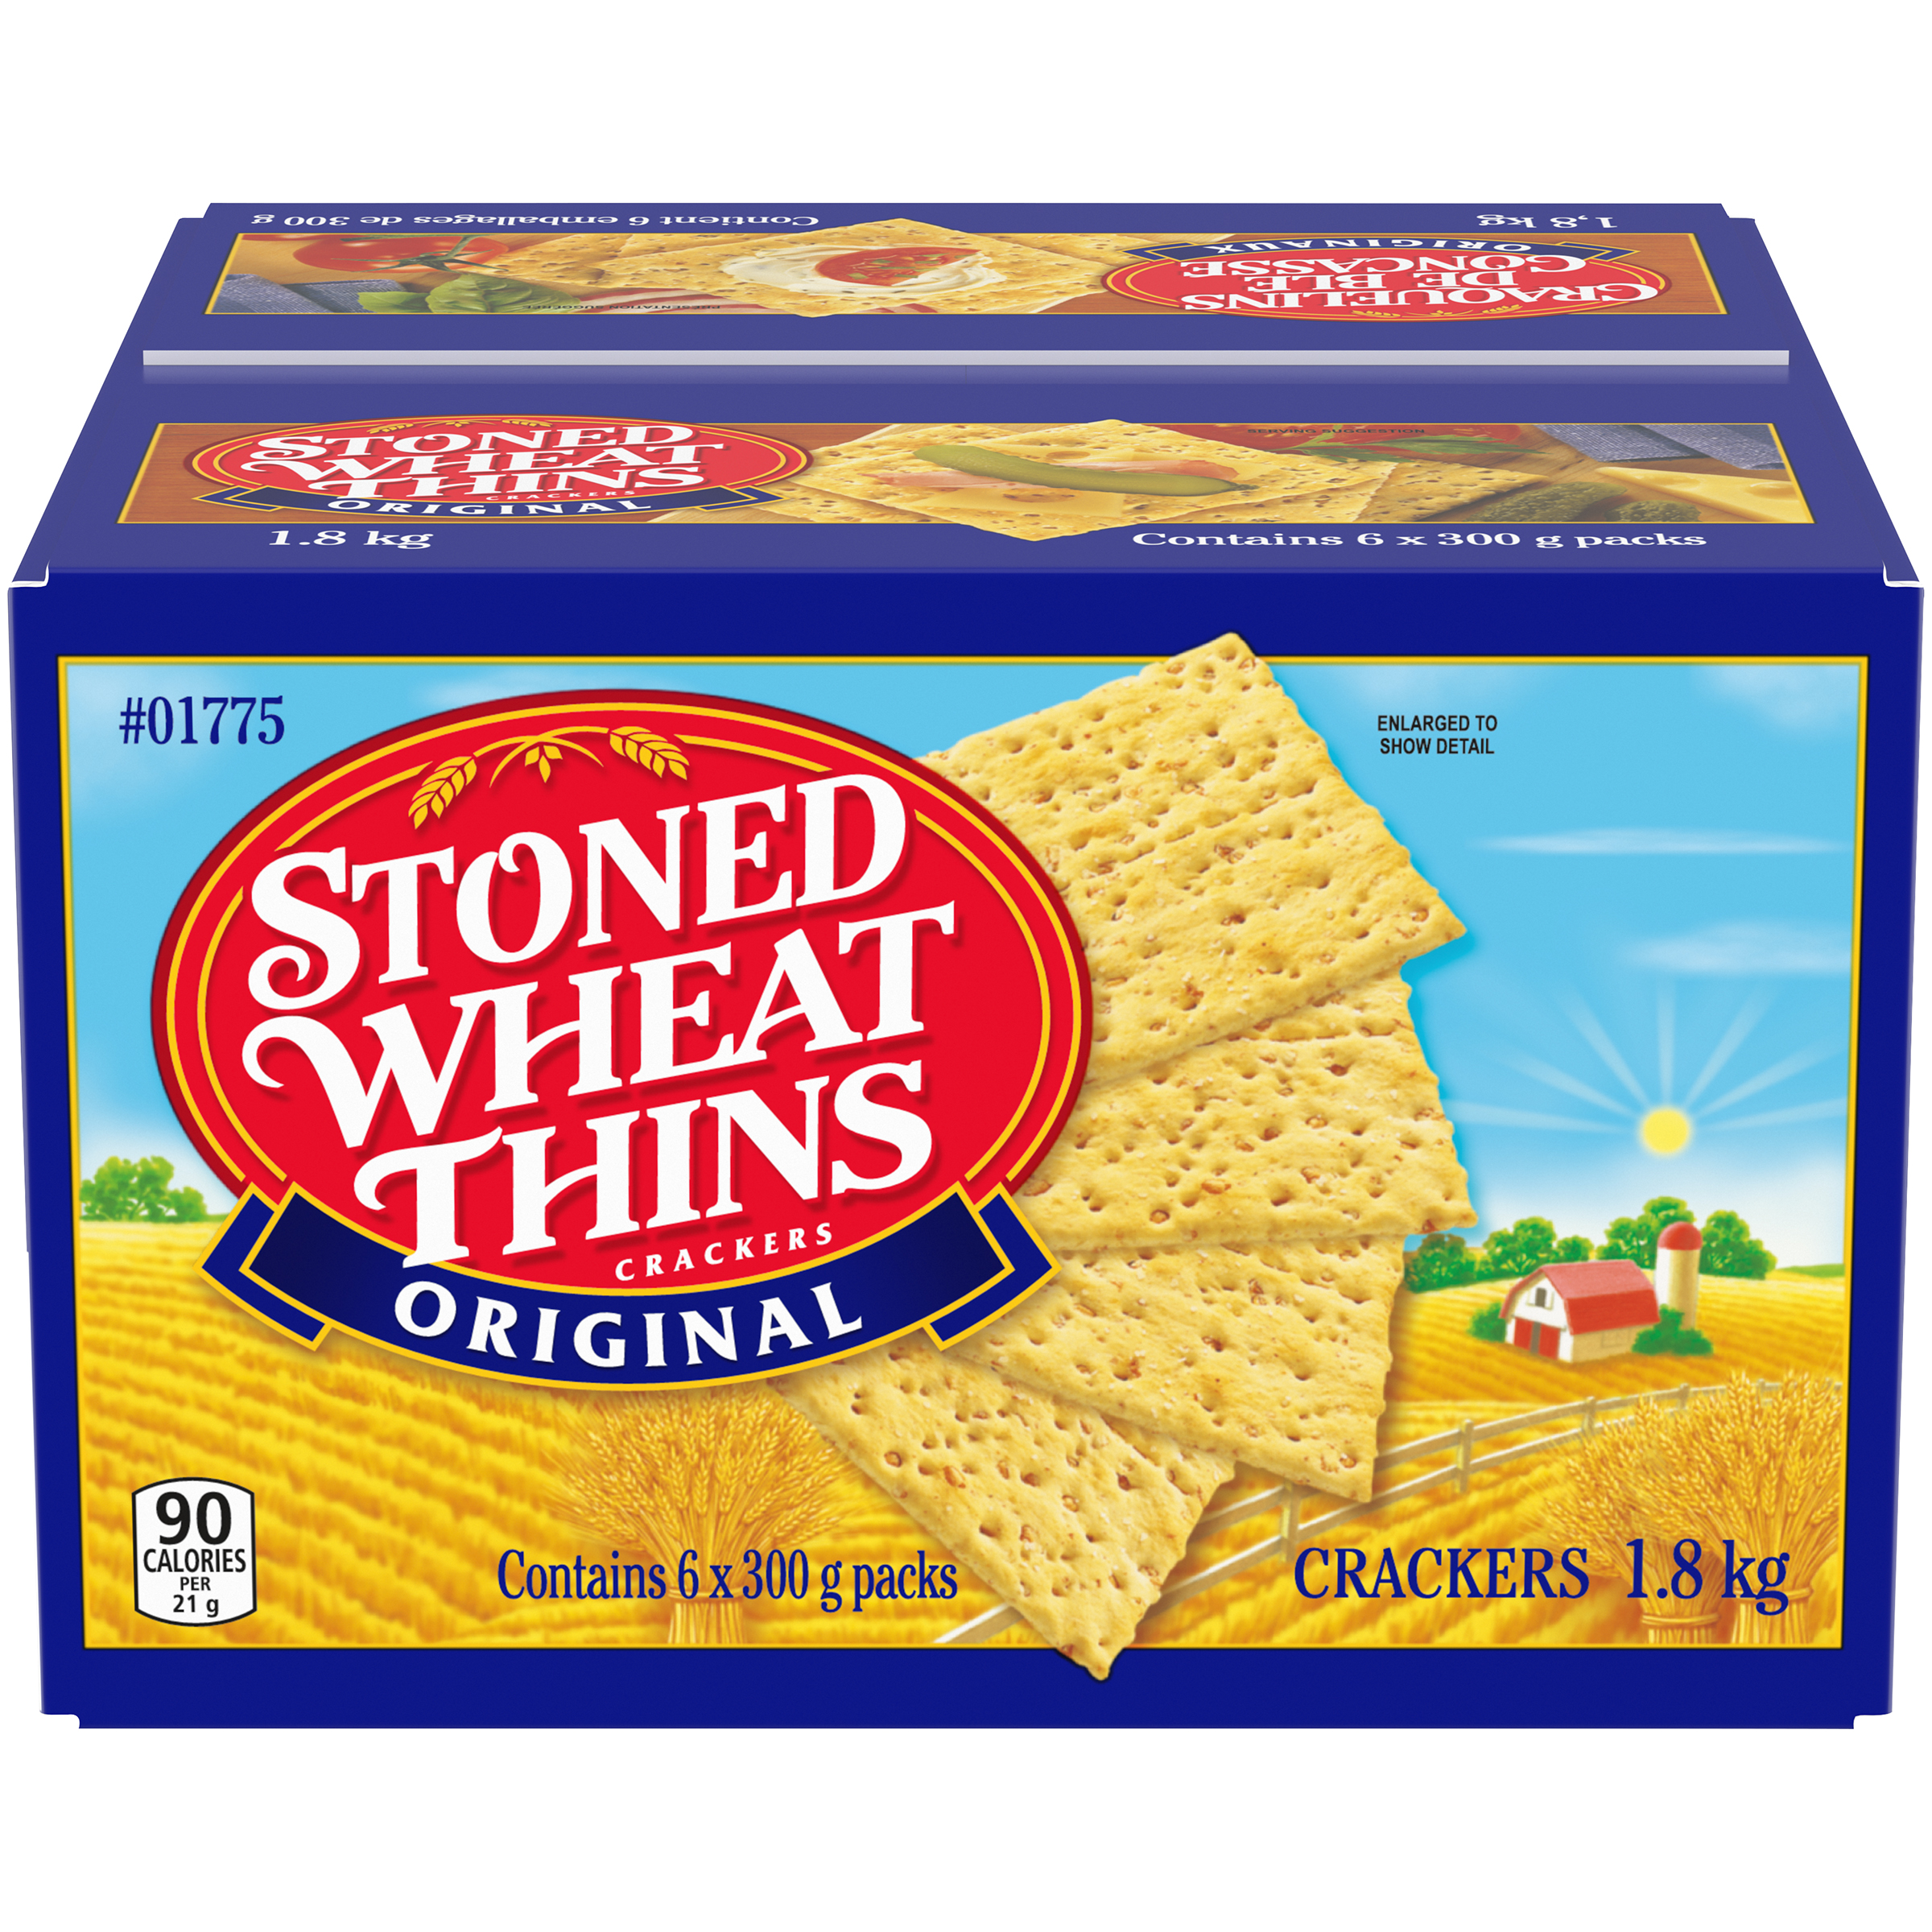 STONED WHEAT THINS Original Crackers, 1.8 kg